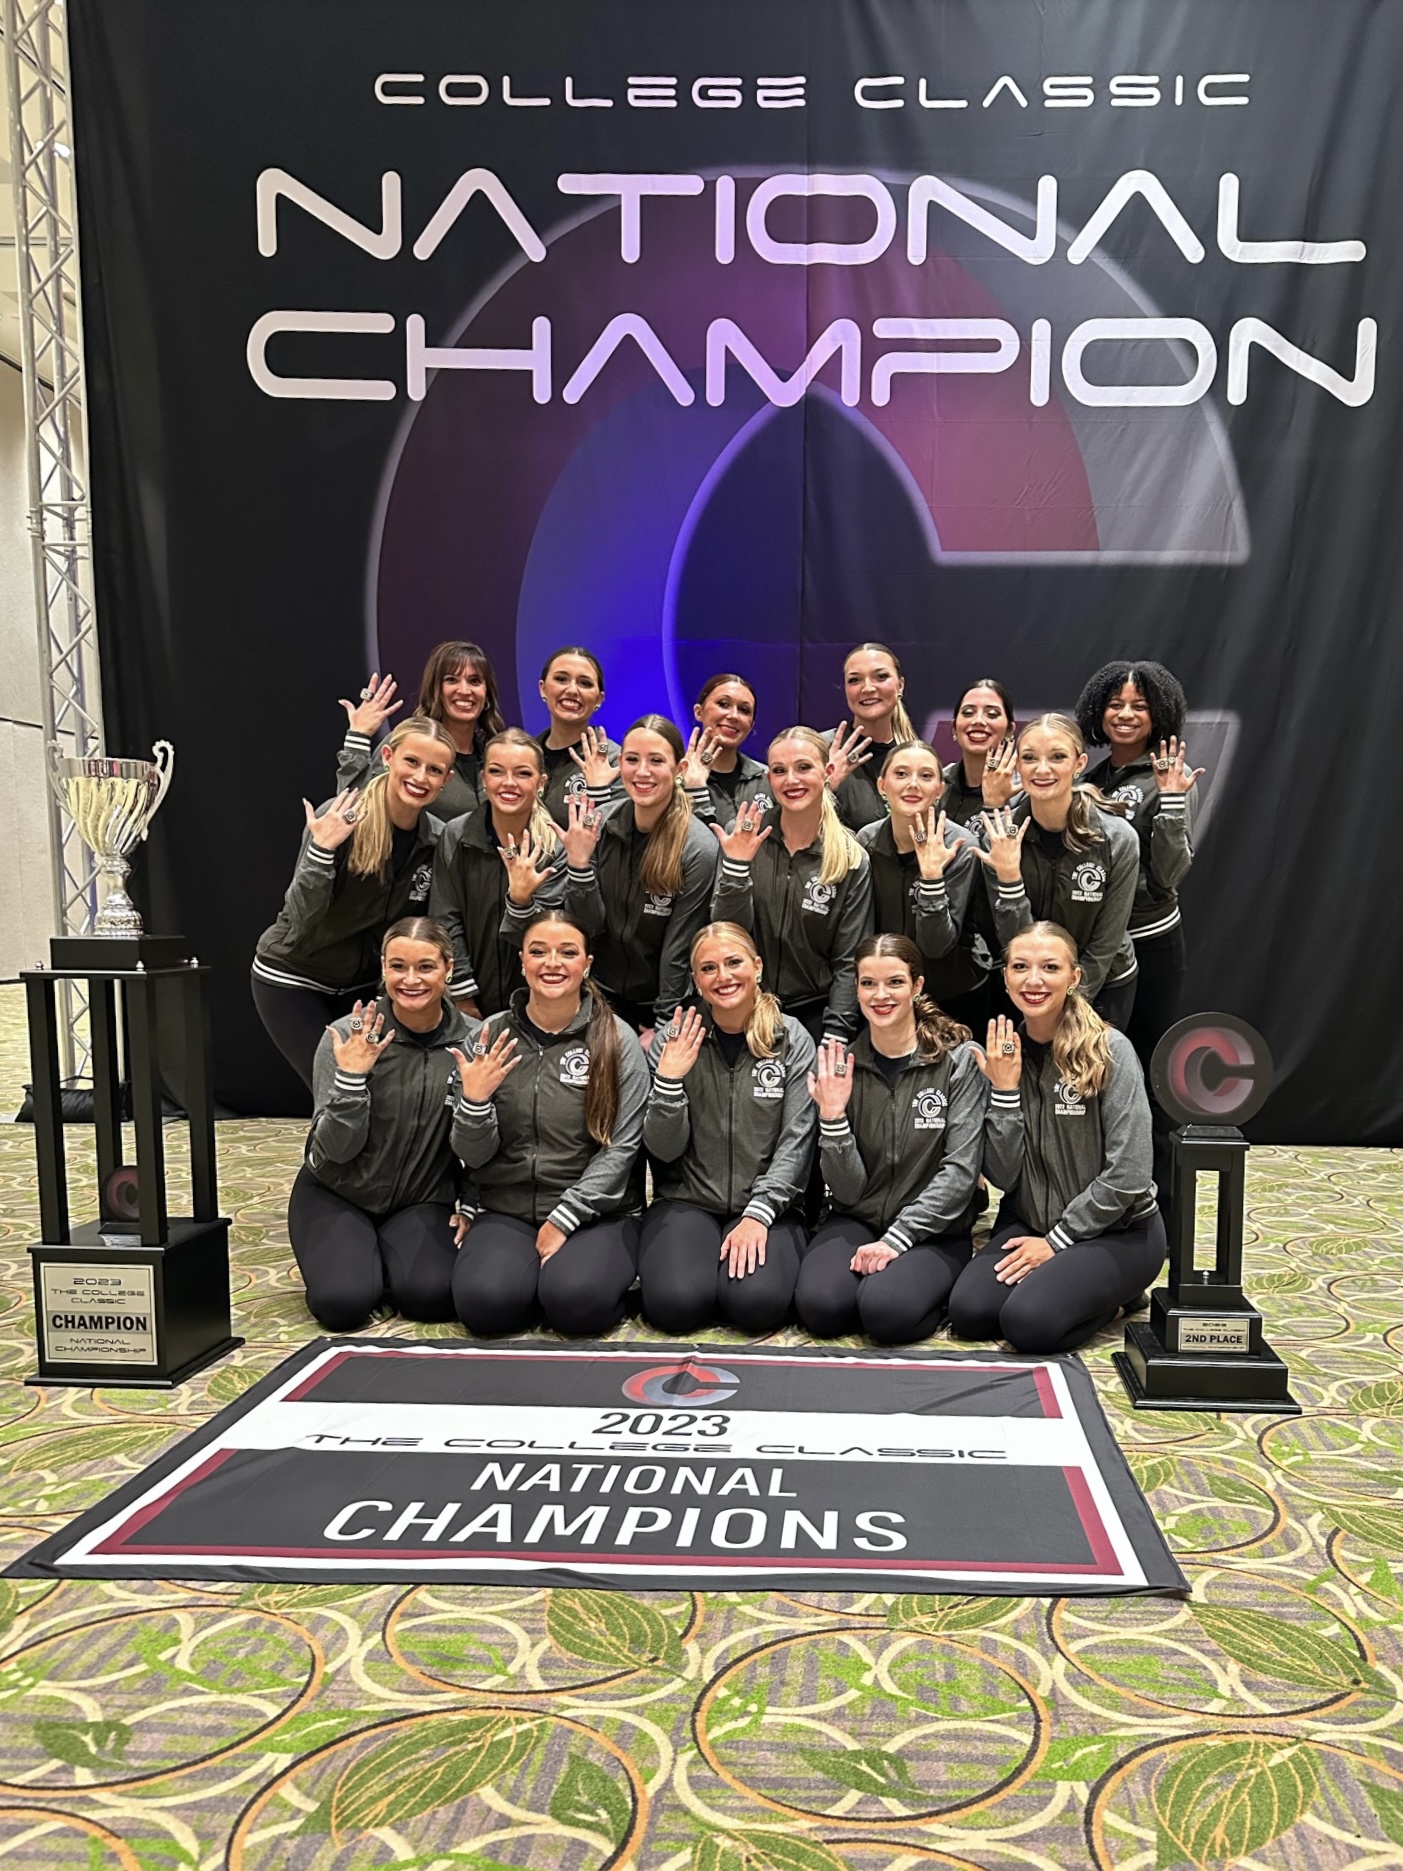 uindy dance team poses as national champions